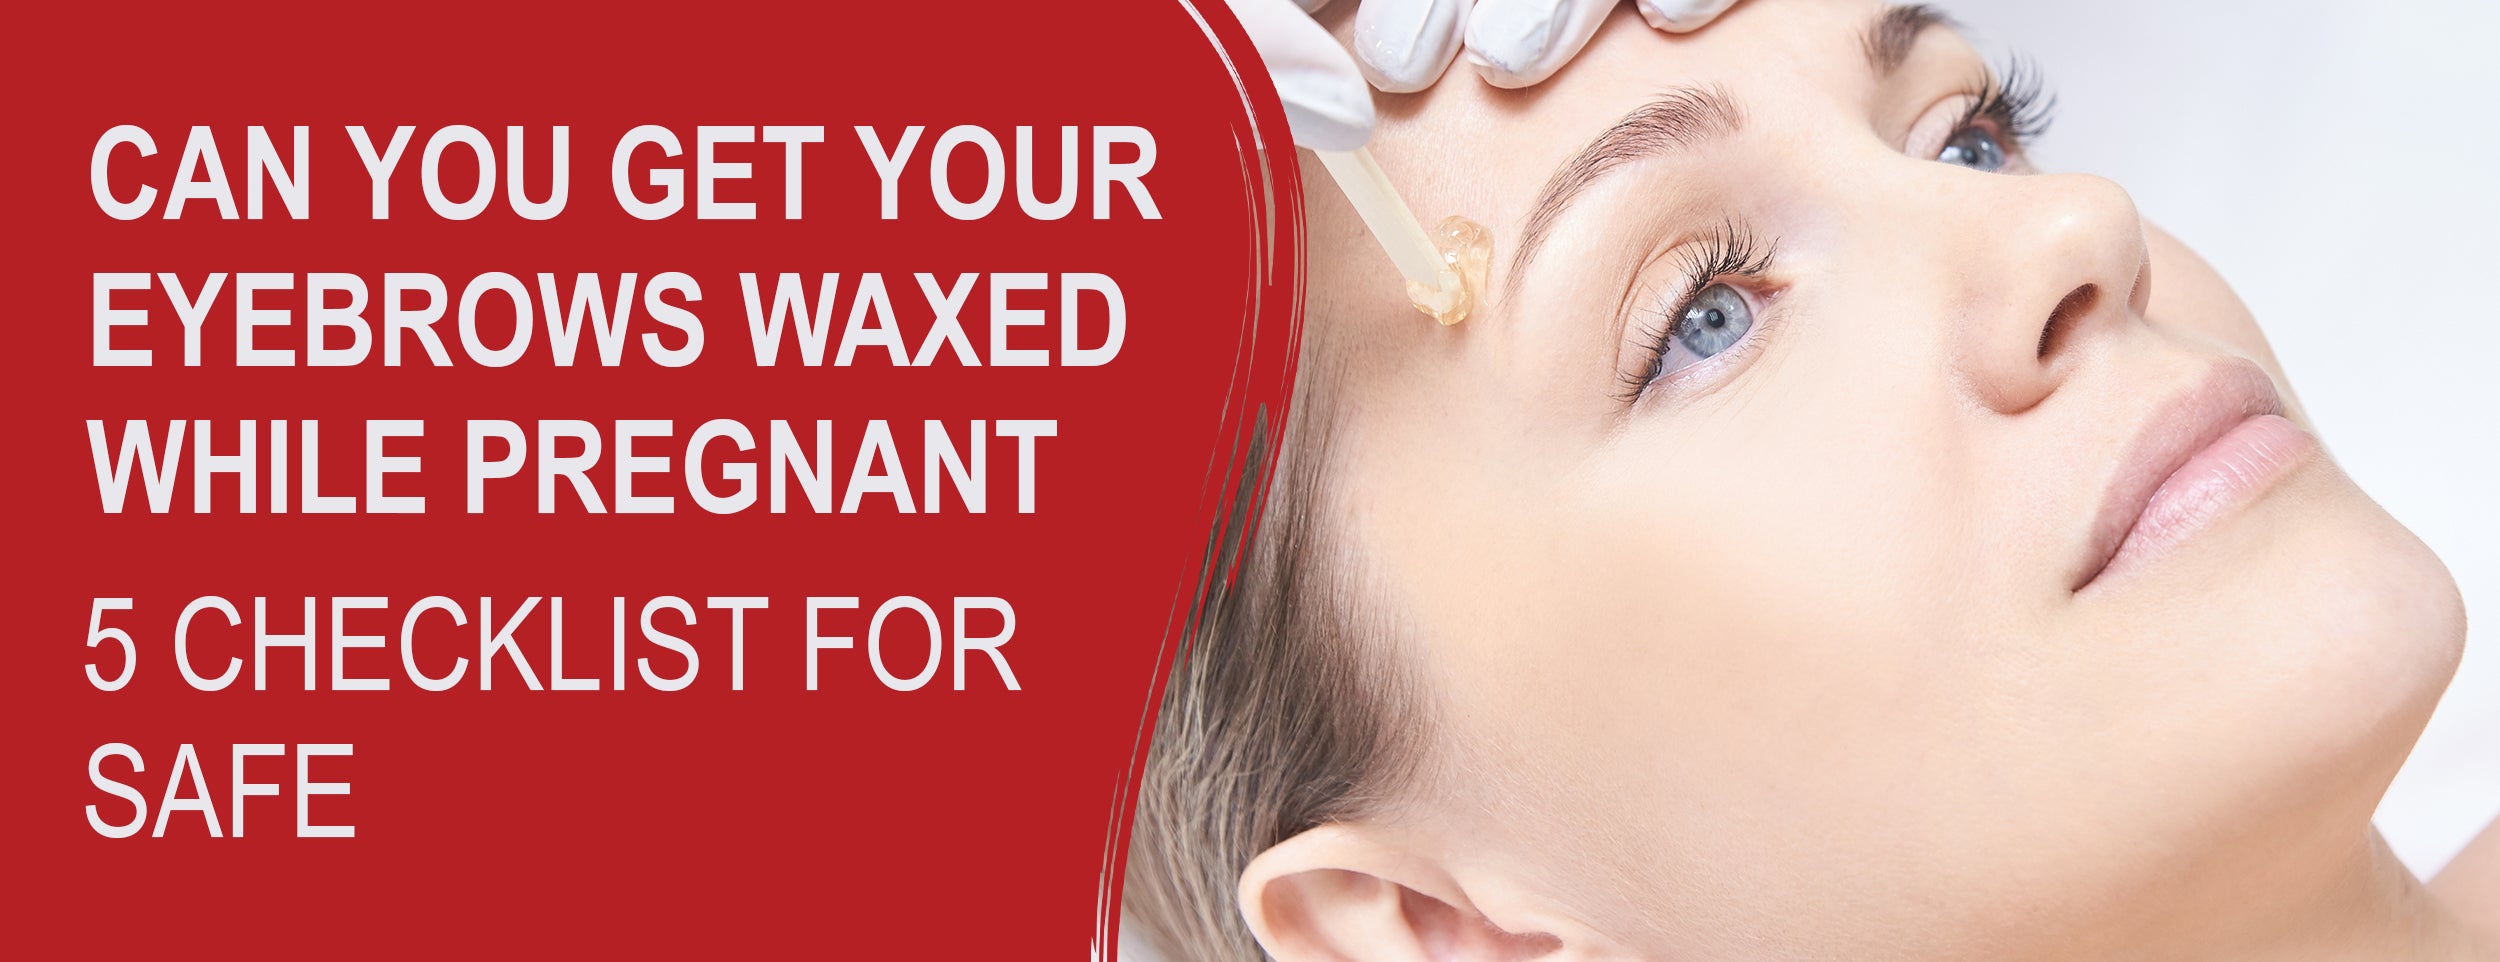 5 Ways & 6 Considerations on Waxing Your Eyebrows While Pregnant